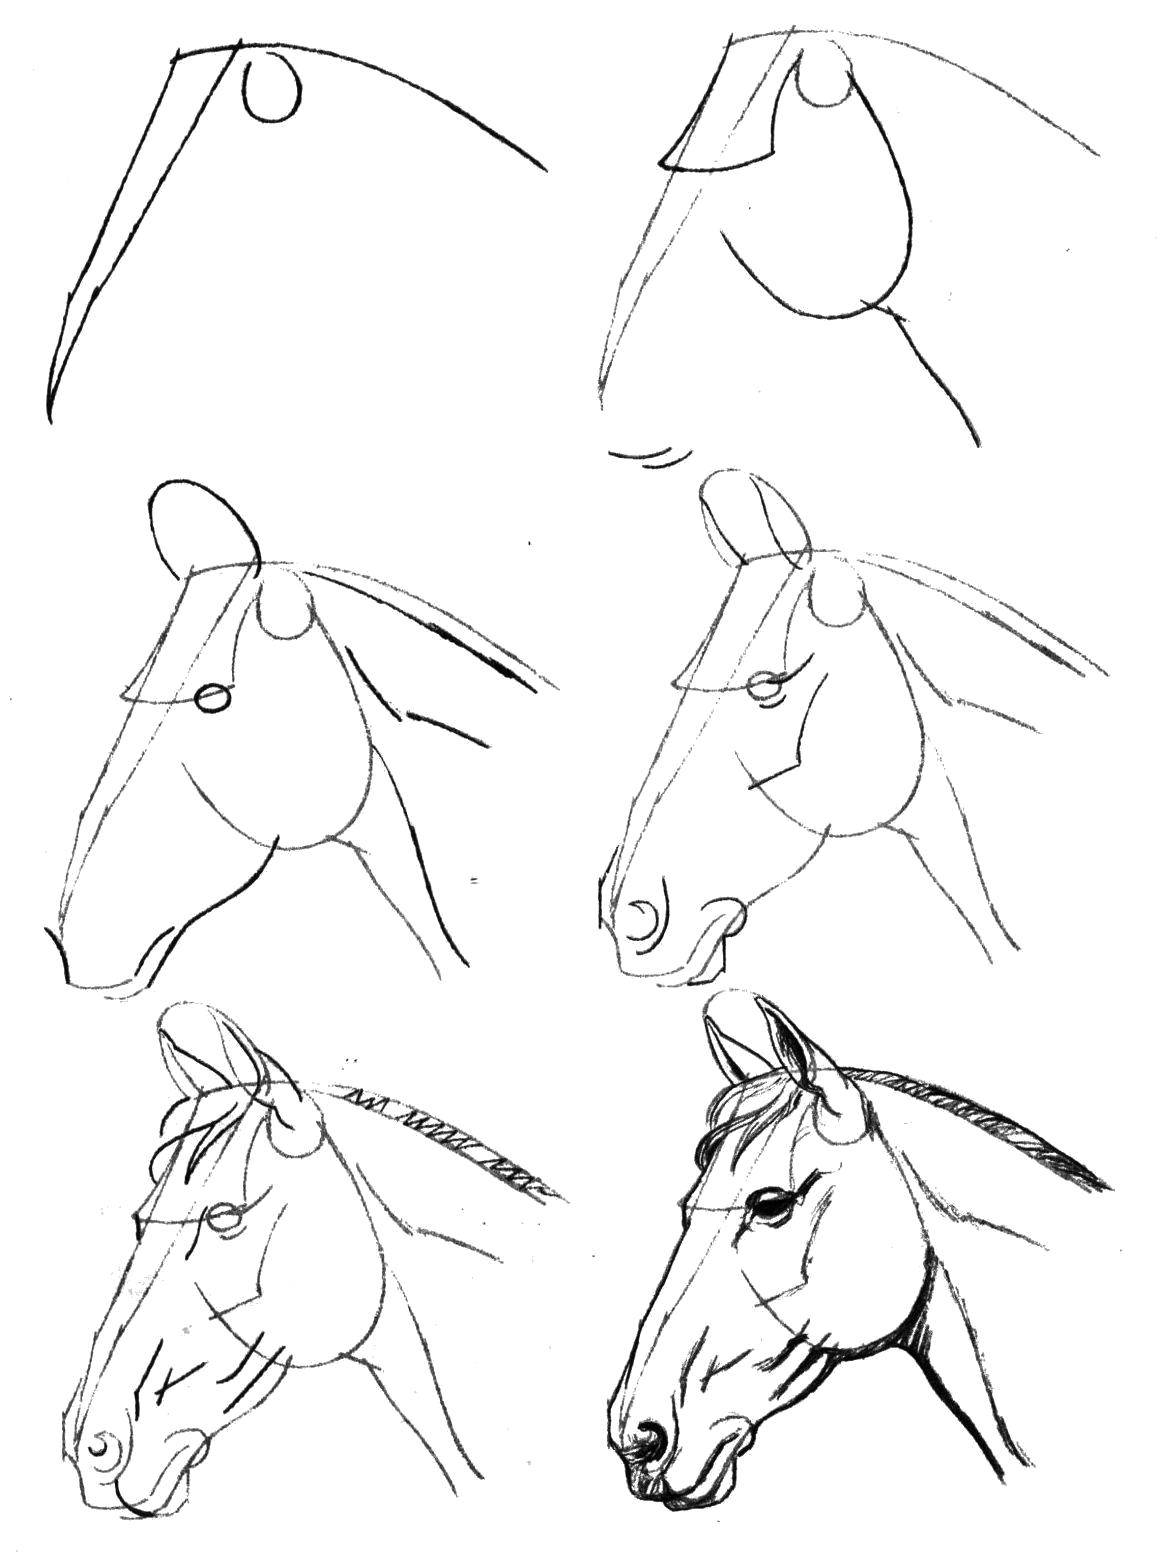 Coloring Gradually draw the horse. Category how to draw by stages in pencil. Tags:  Animals, horse.